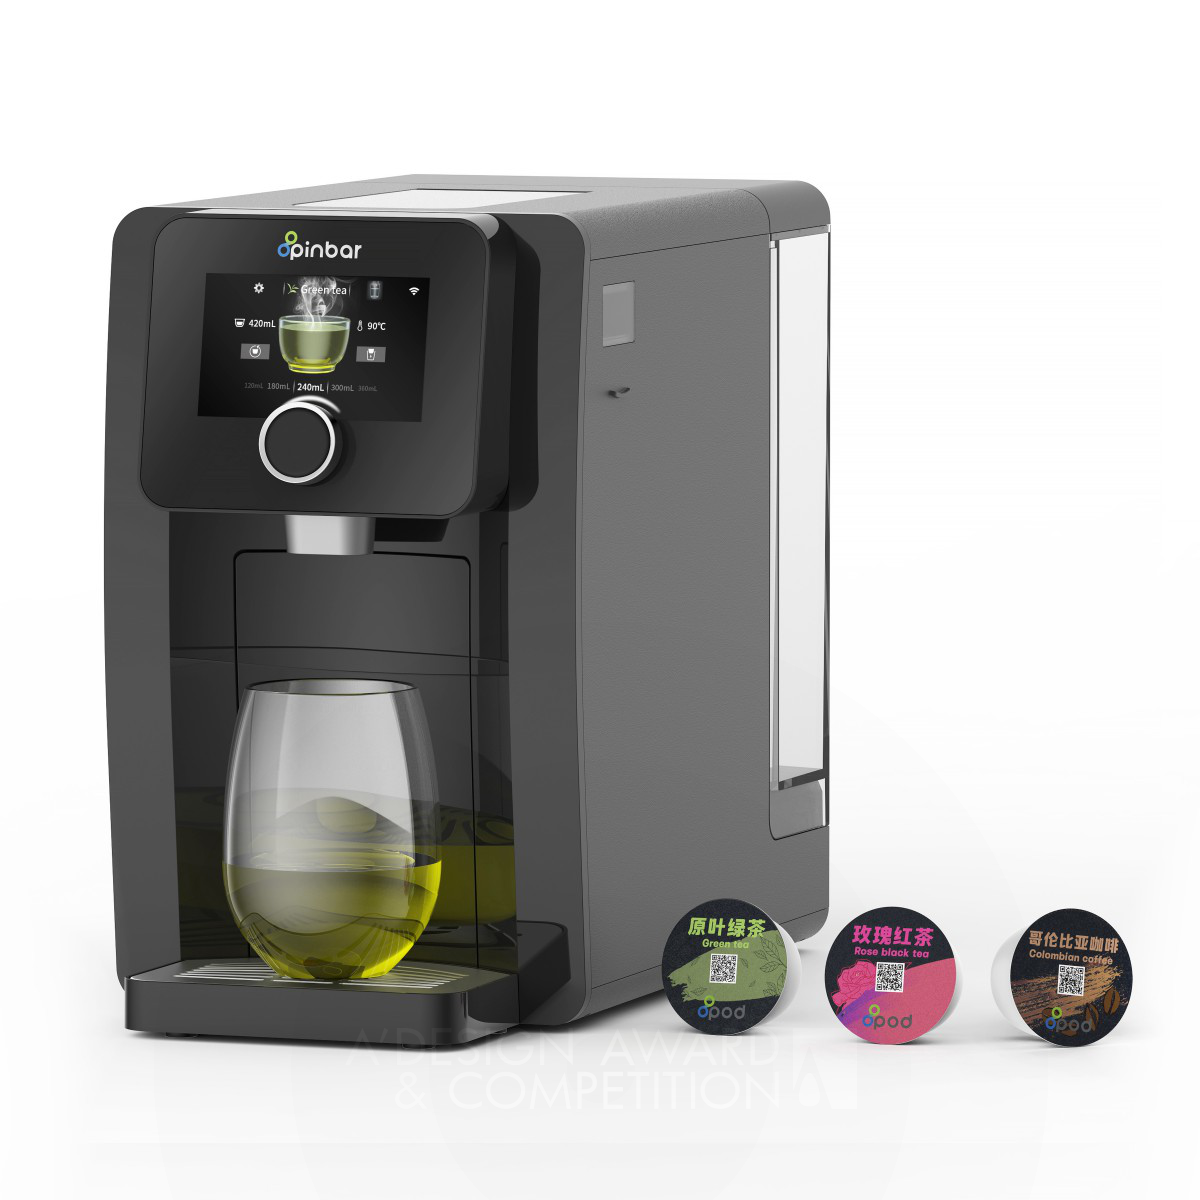 Guoxiao Huang wins Iron at the prestigious A' Home Appliances Design Award with Pinbar Tea And Beverage Capsule Machine.